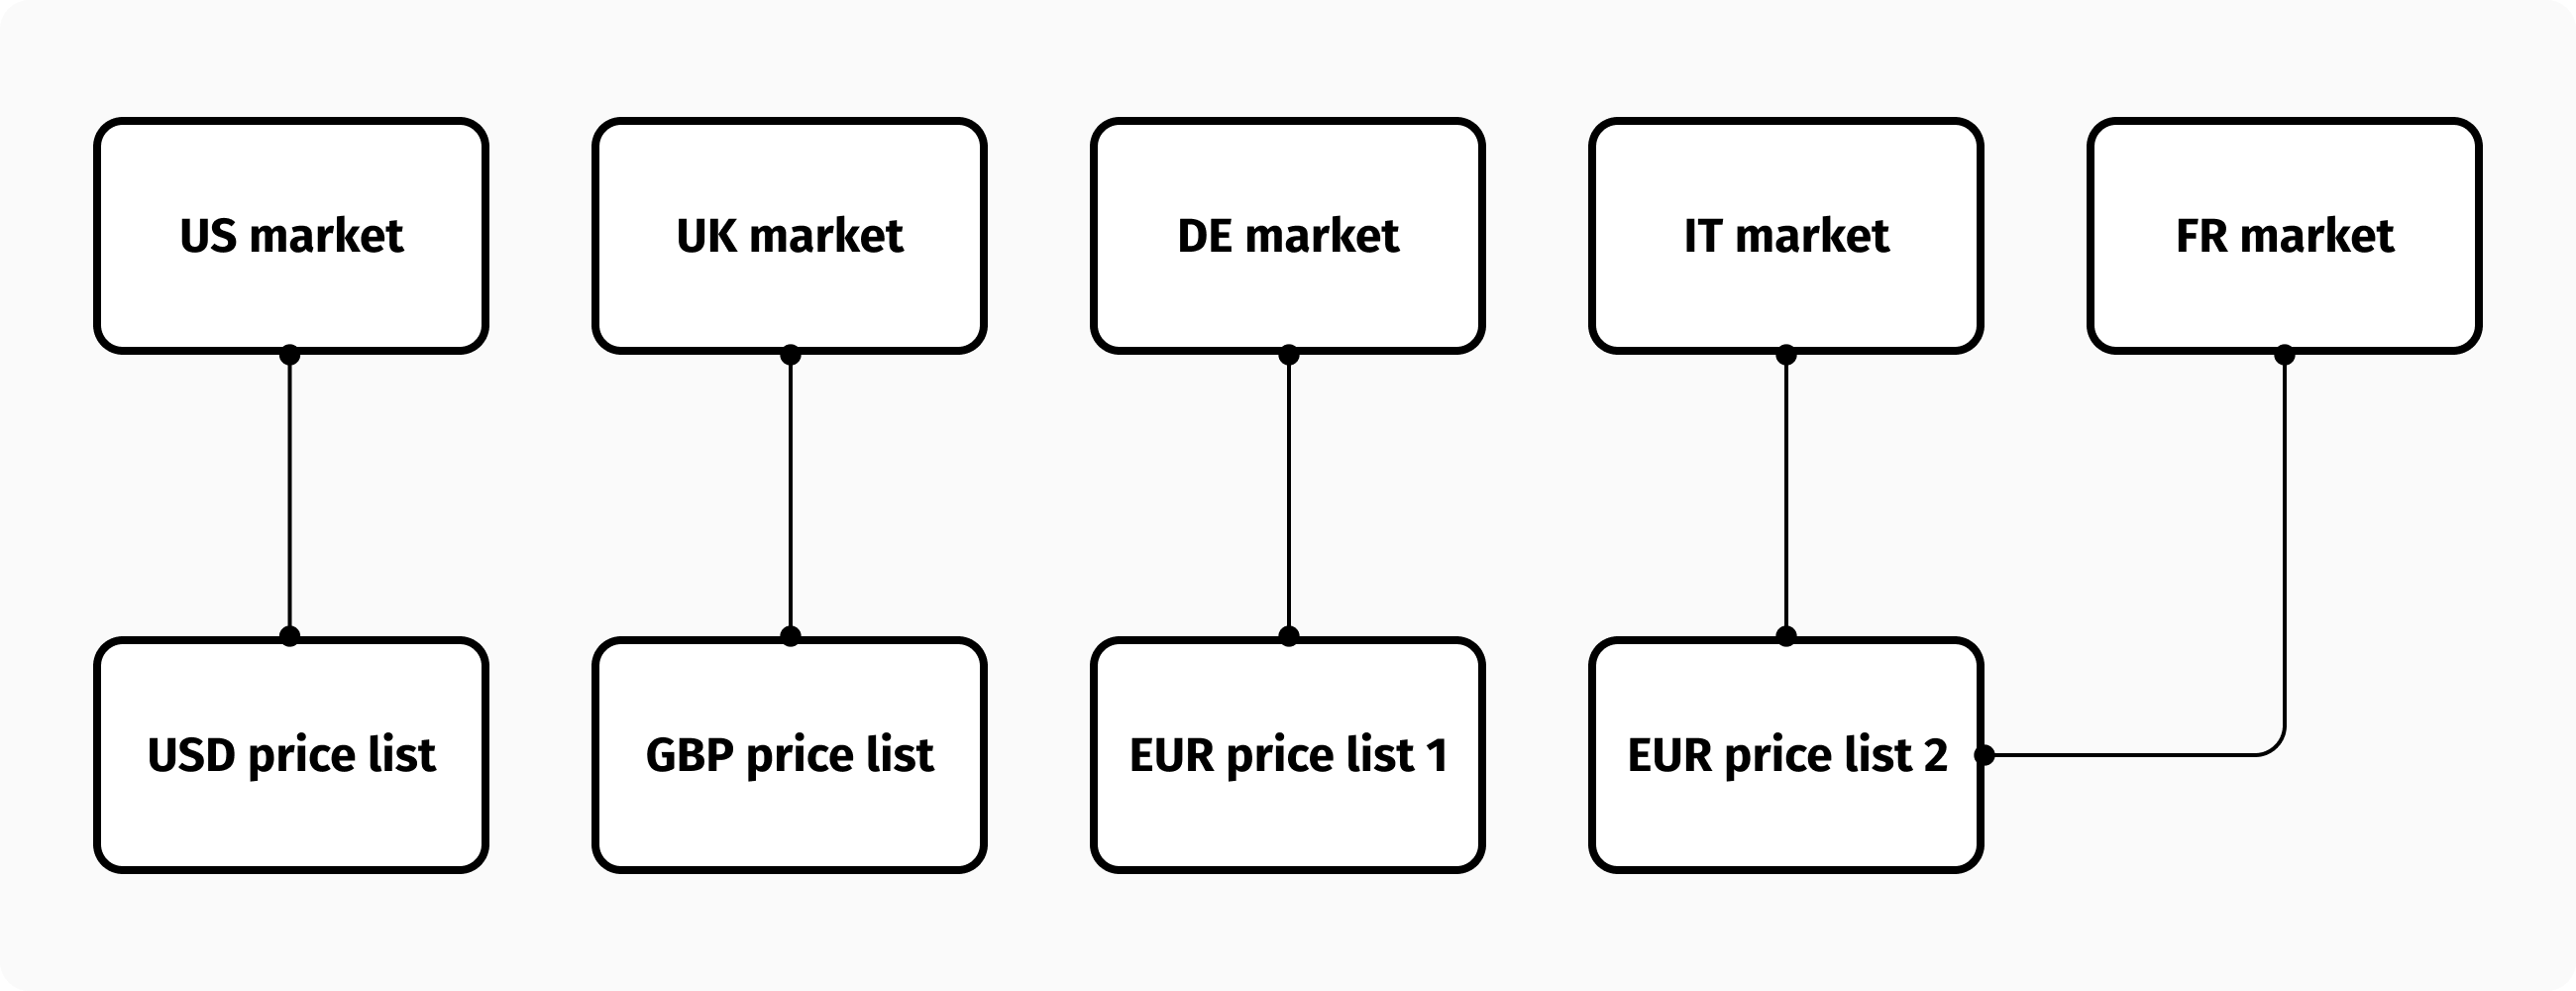 Mapping multiple markets to multiple price lists and currencies.